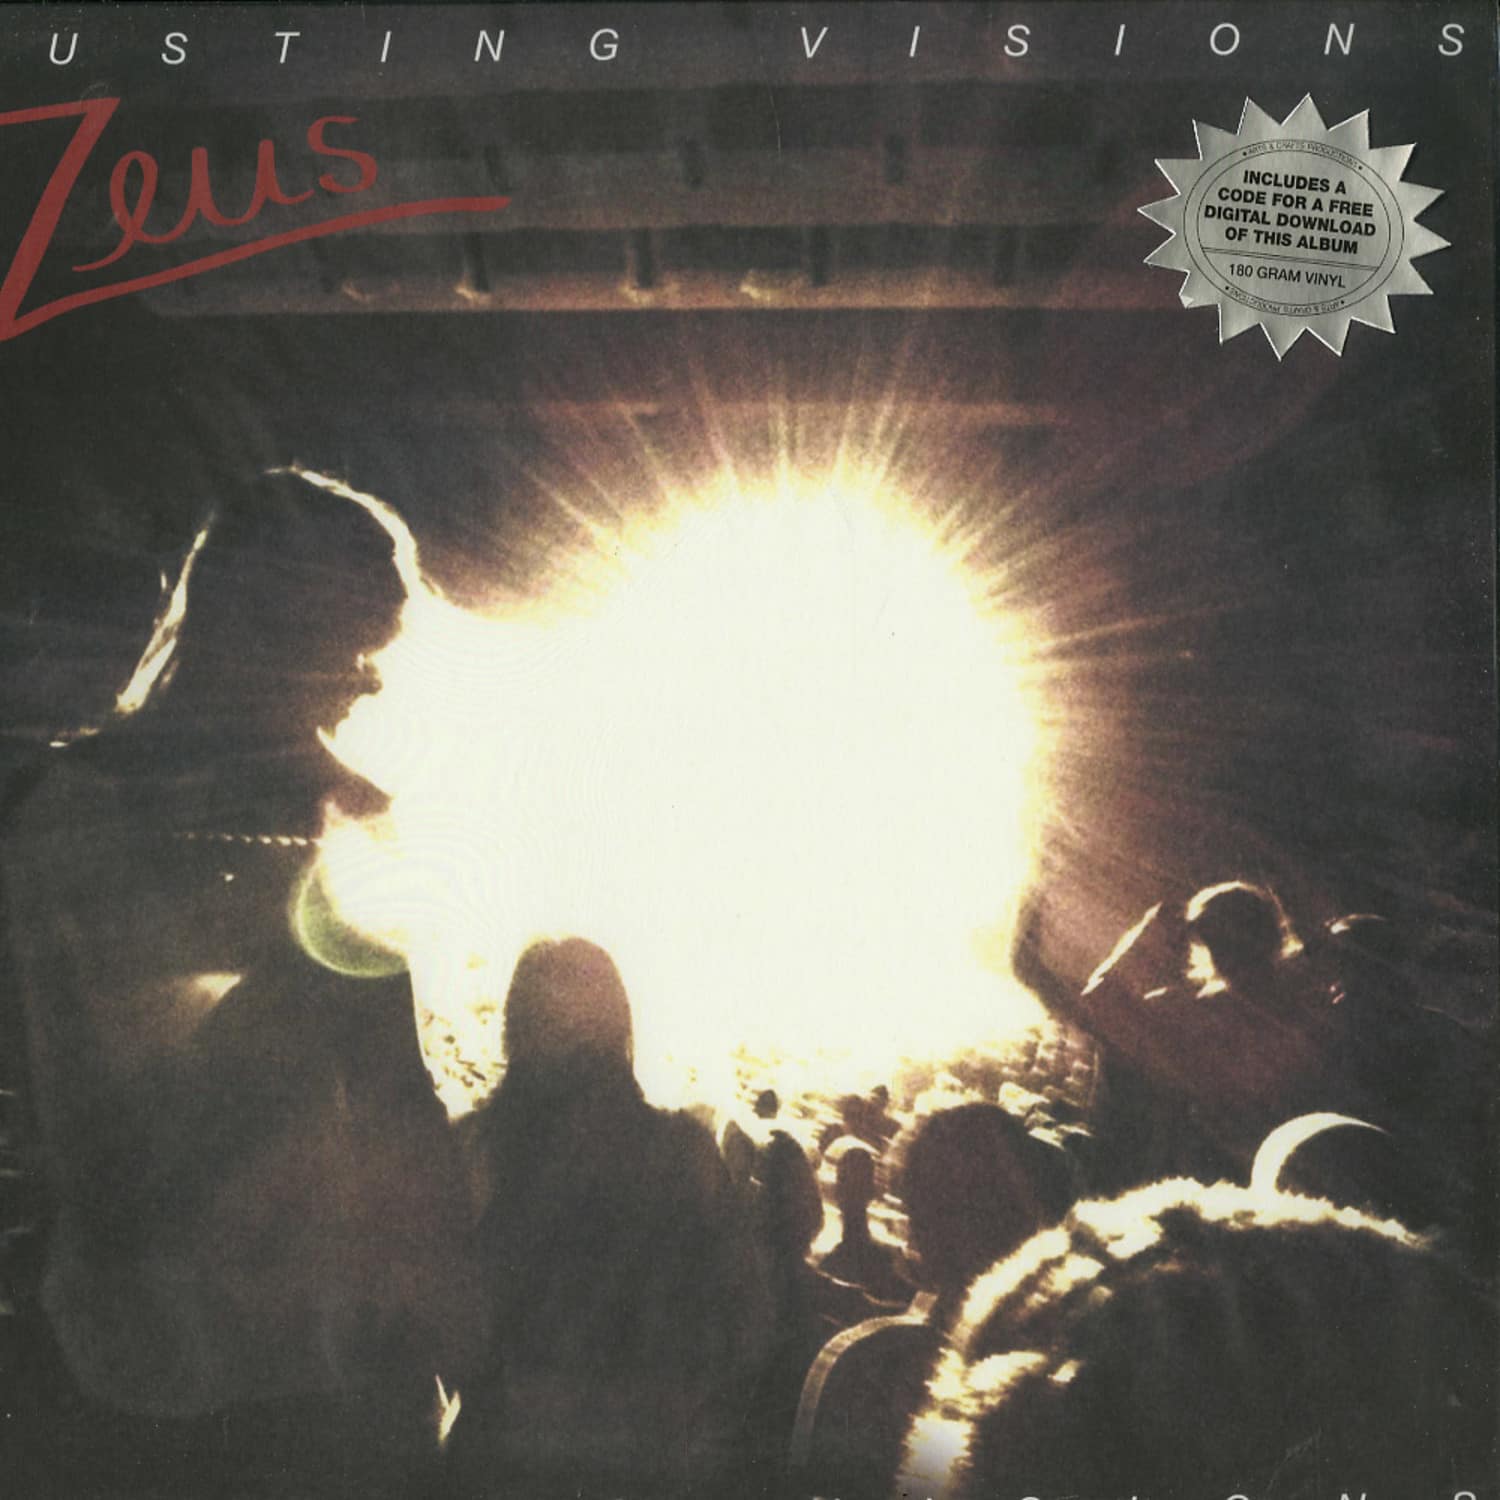 Zeus - BUSTING VISIONS 